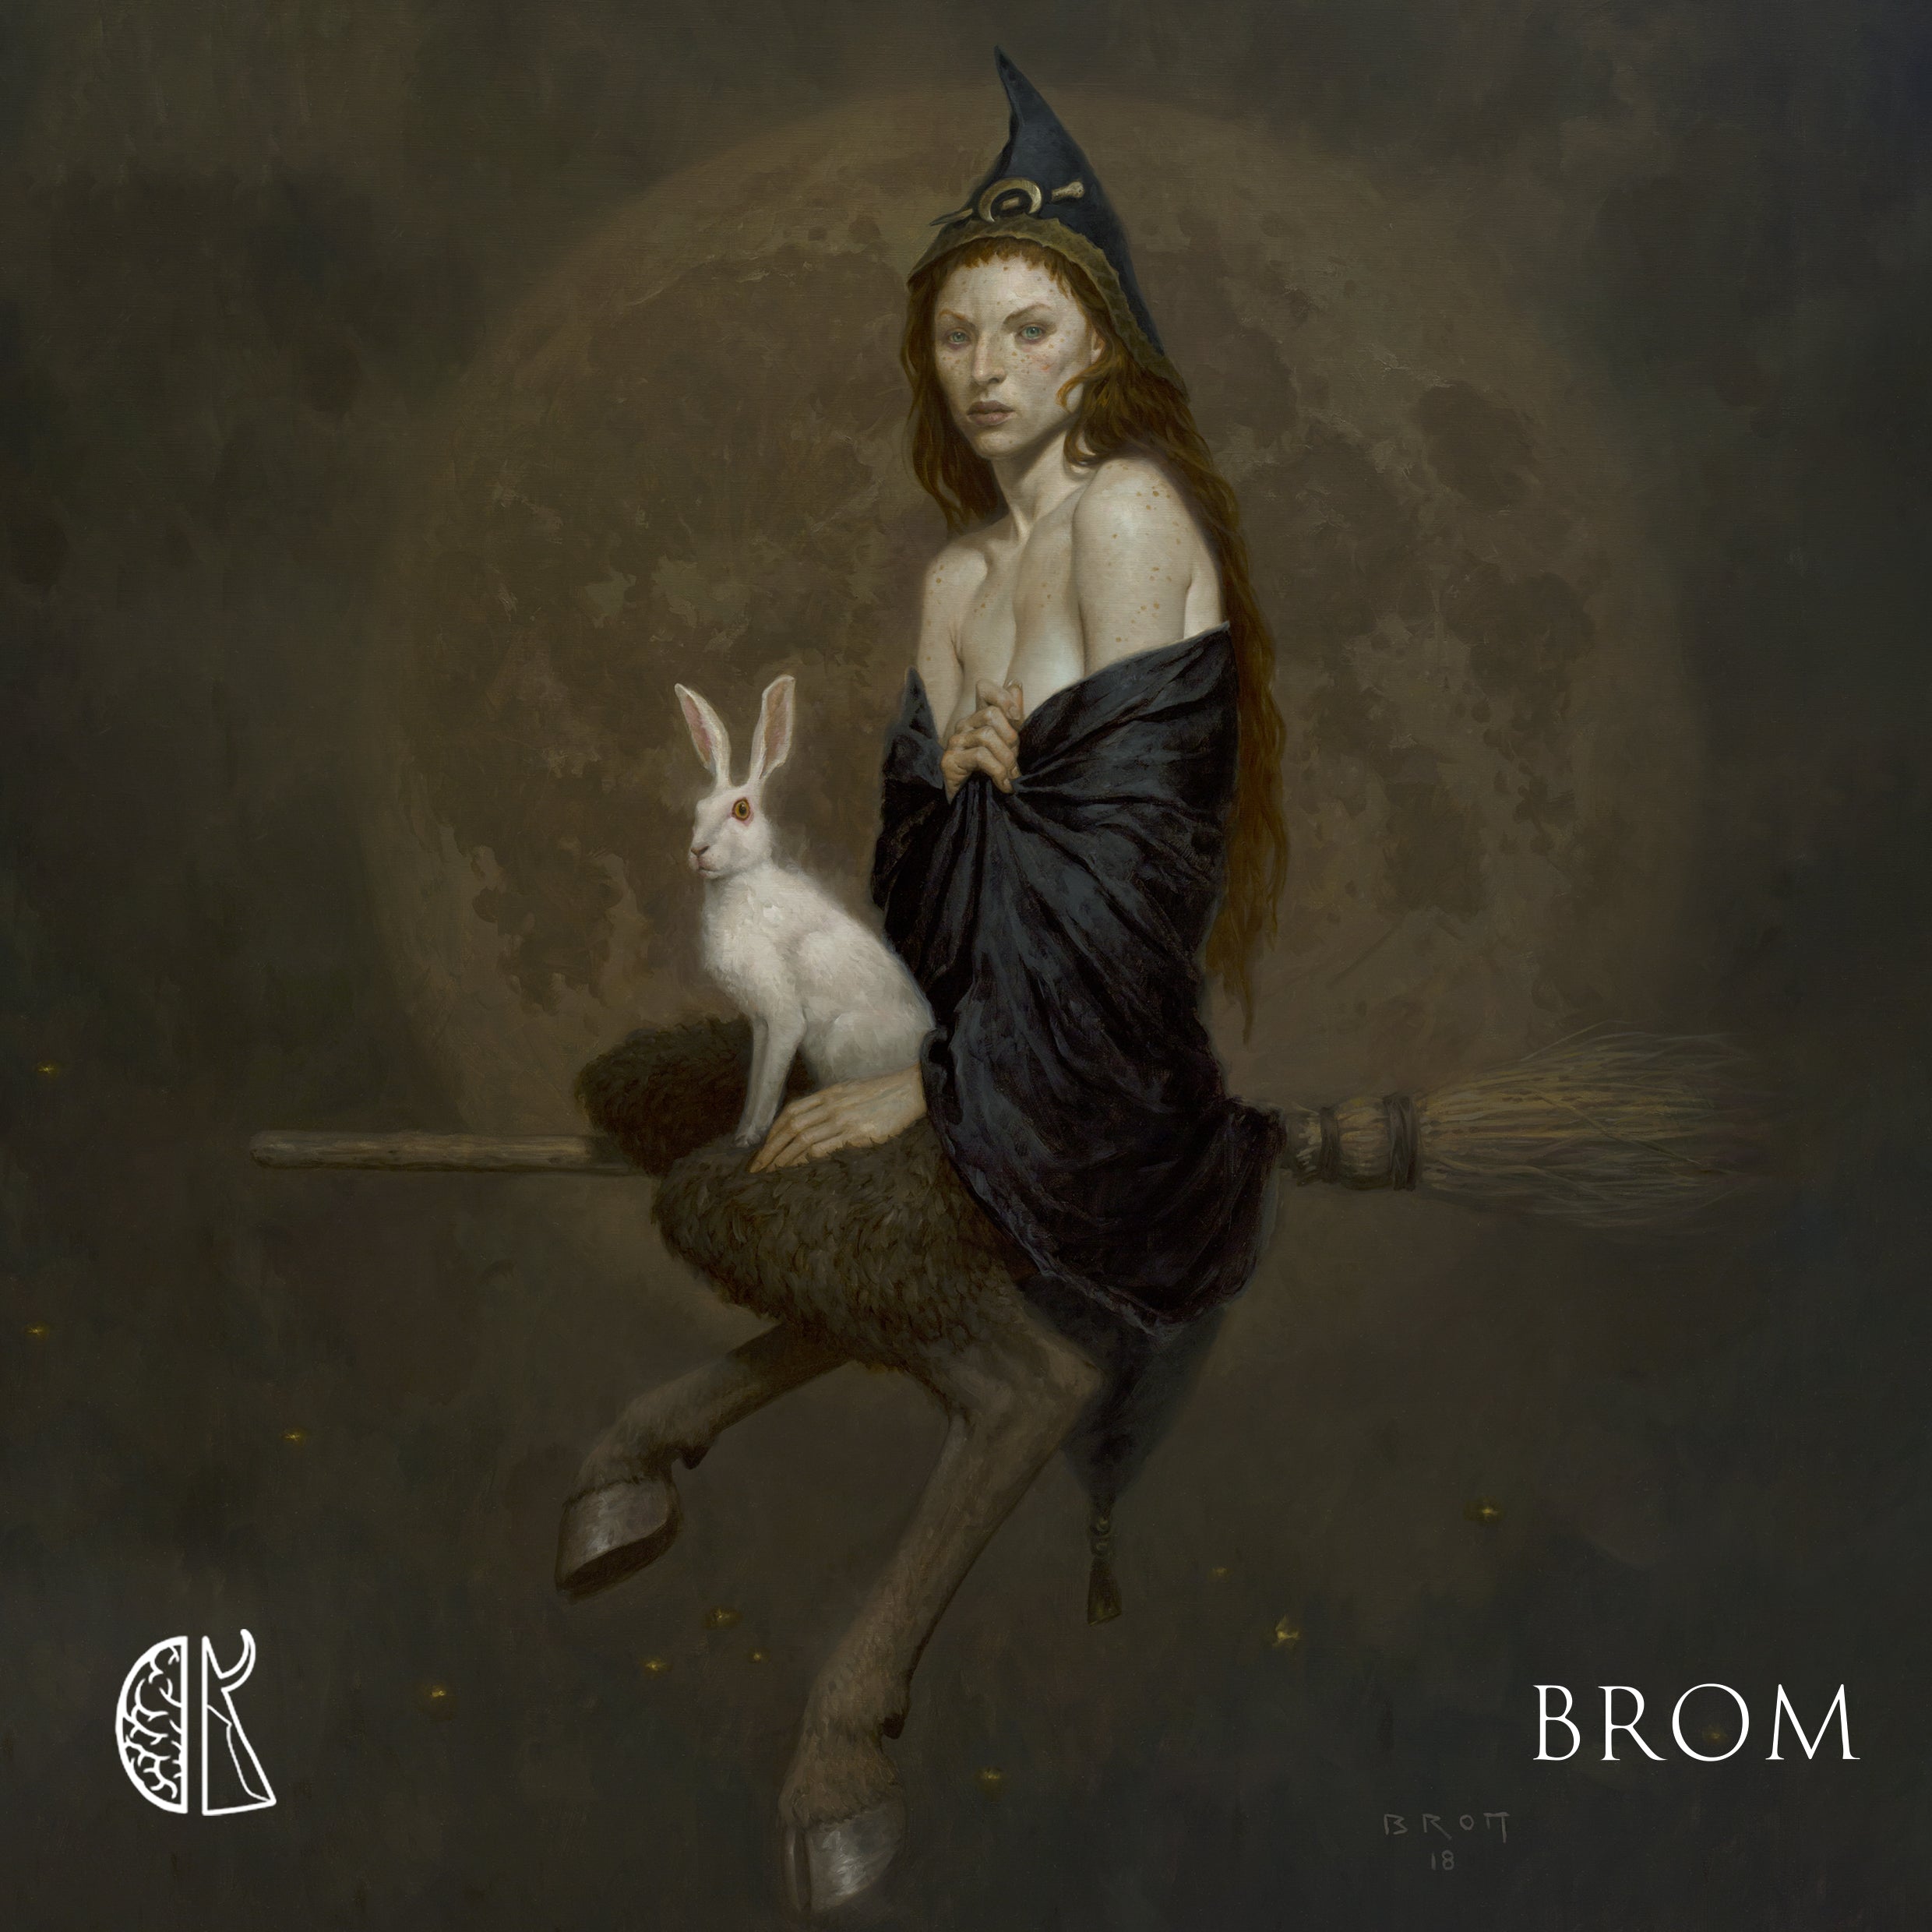 BROM: Hare of the moon